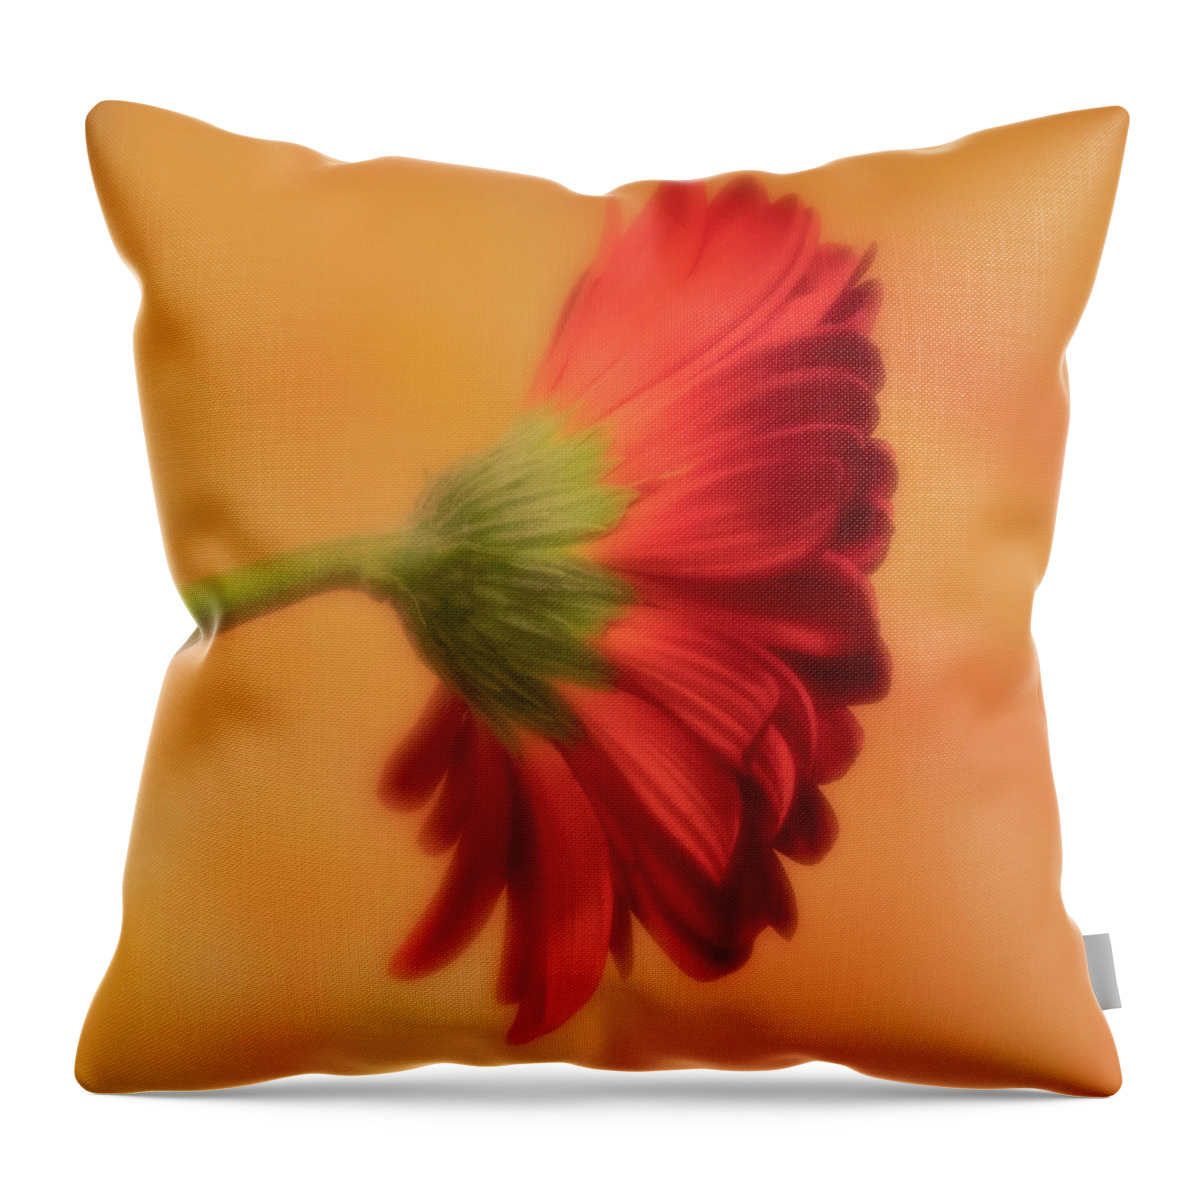 Gerber Daisy Throw Pillow featuring the photograph Daisy In Repose by Forest Floor Photography